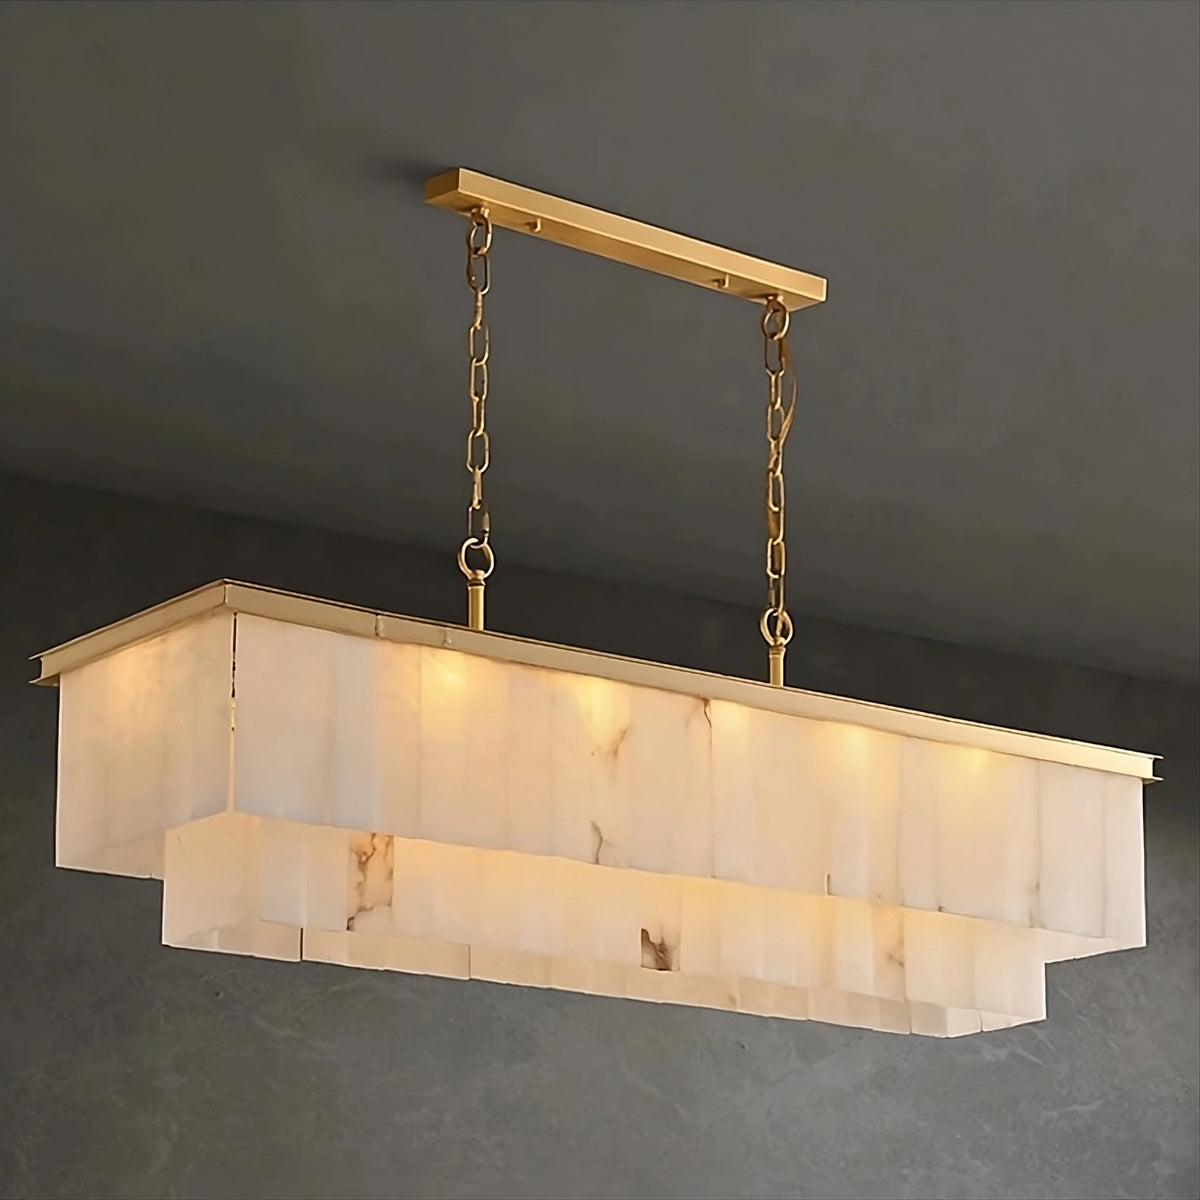 An elegant rectangular brass chandelier with a gold frame and chain hangs from the ceiling. The light fixture boasts an alabaster-like texture with a layered, frosted glass design, emitting a warm, soft glow. This striking Shopp578 Natural Marble Dining Room Chandelier contrasts beautifully against the simple, dark gray wall.